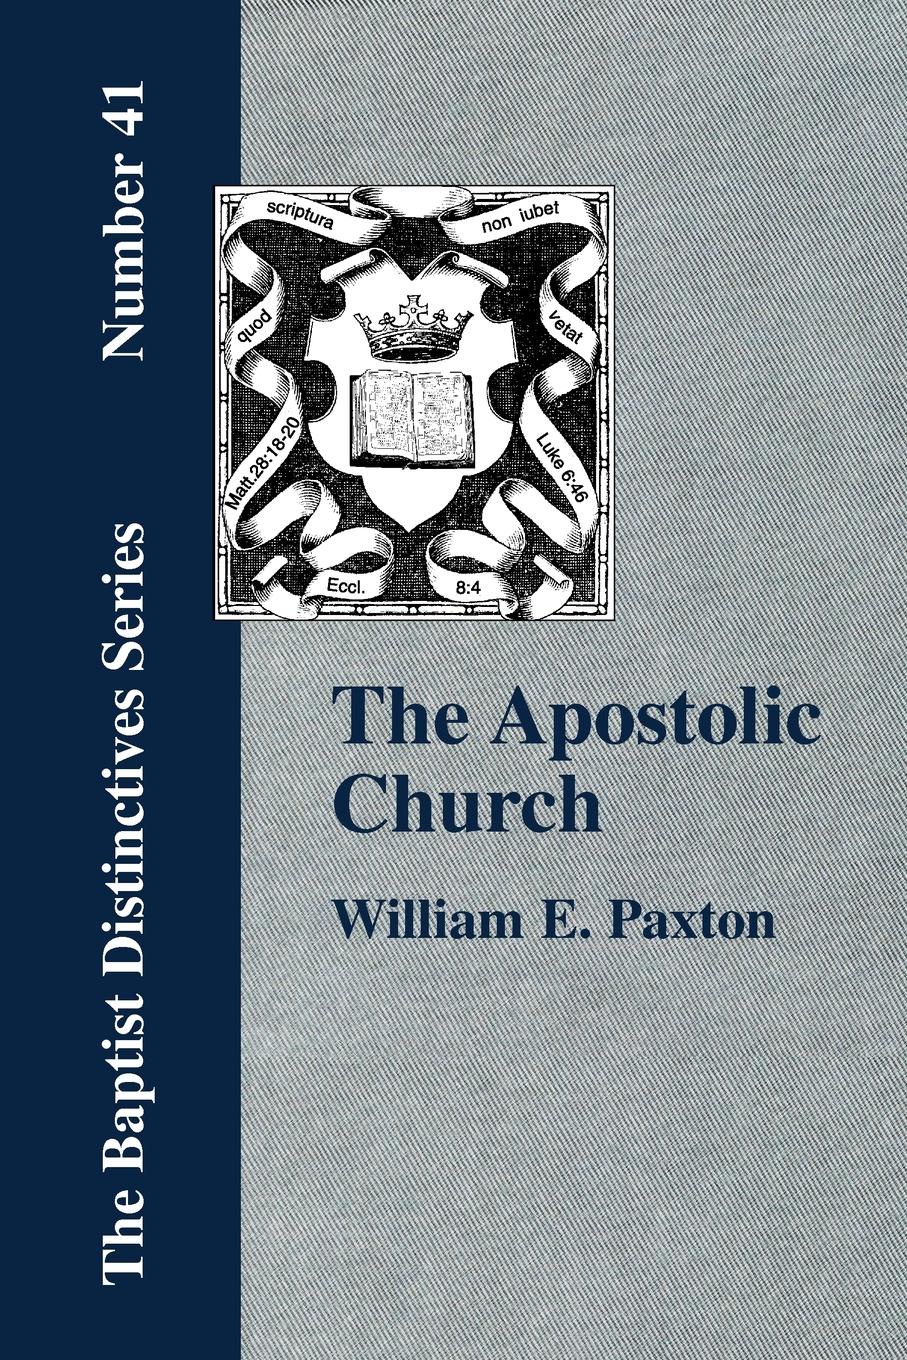 The Apostolic Church; Being an Inquiry into the Constitution and Polity of that Visible Organization Set Up by Jesus Christ and His Apostles